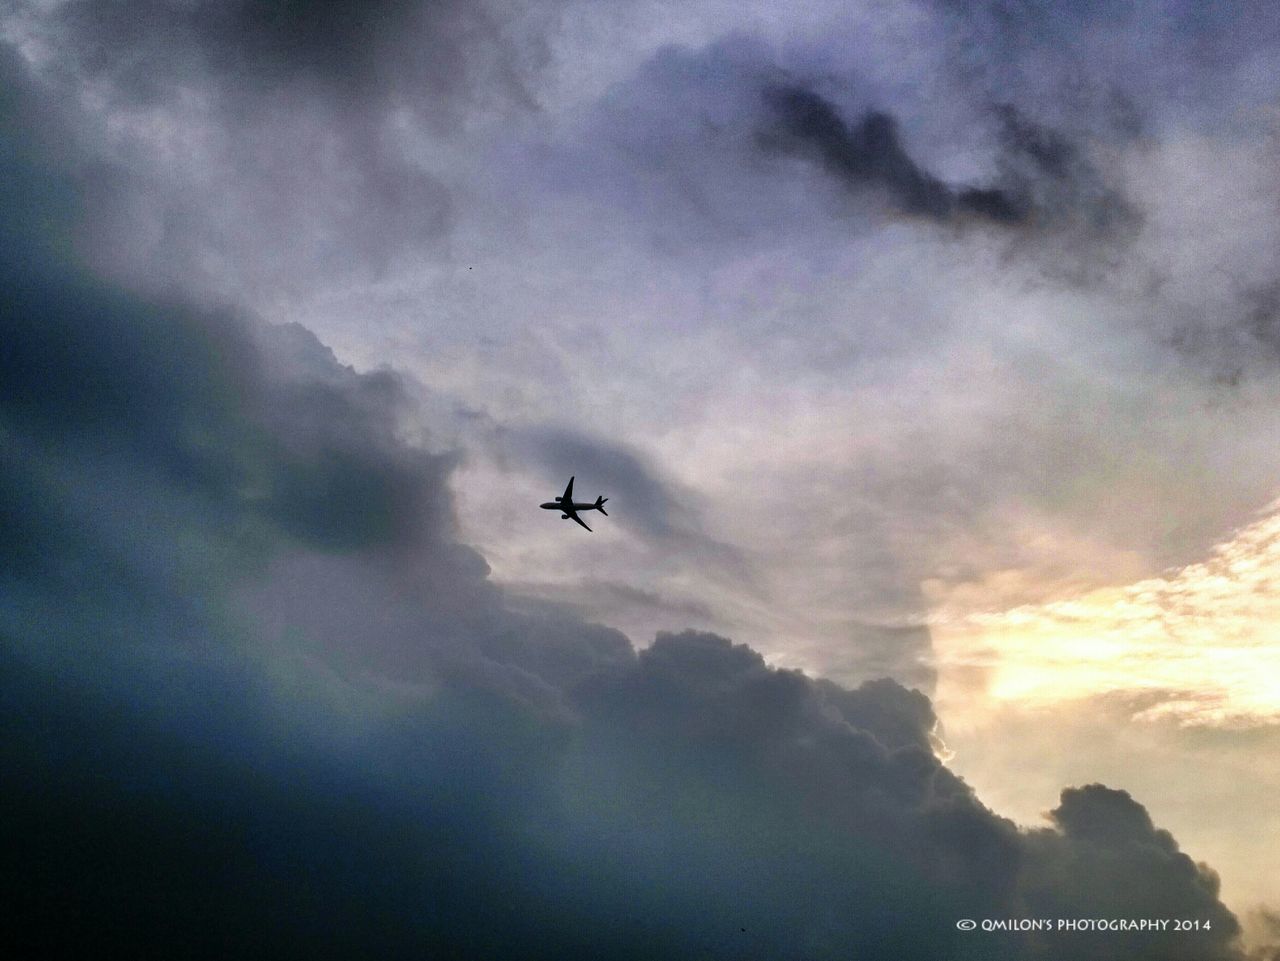 airplane, air vehicle, mode of transport, transportation, flying, sky, cloud - sky, cloudy, mid-air, low angle view, public transportation, travel, on the move, weather, journey, silhouette, dusk, overcast, commercial airplane, nature